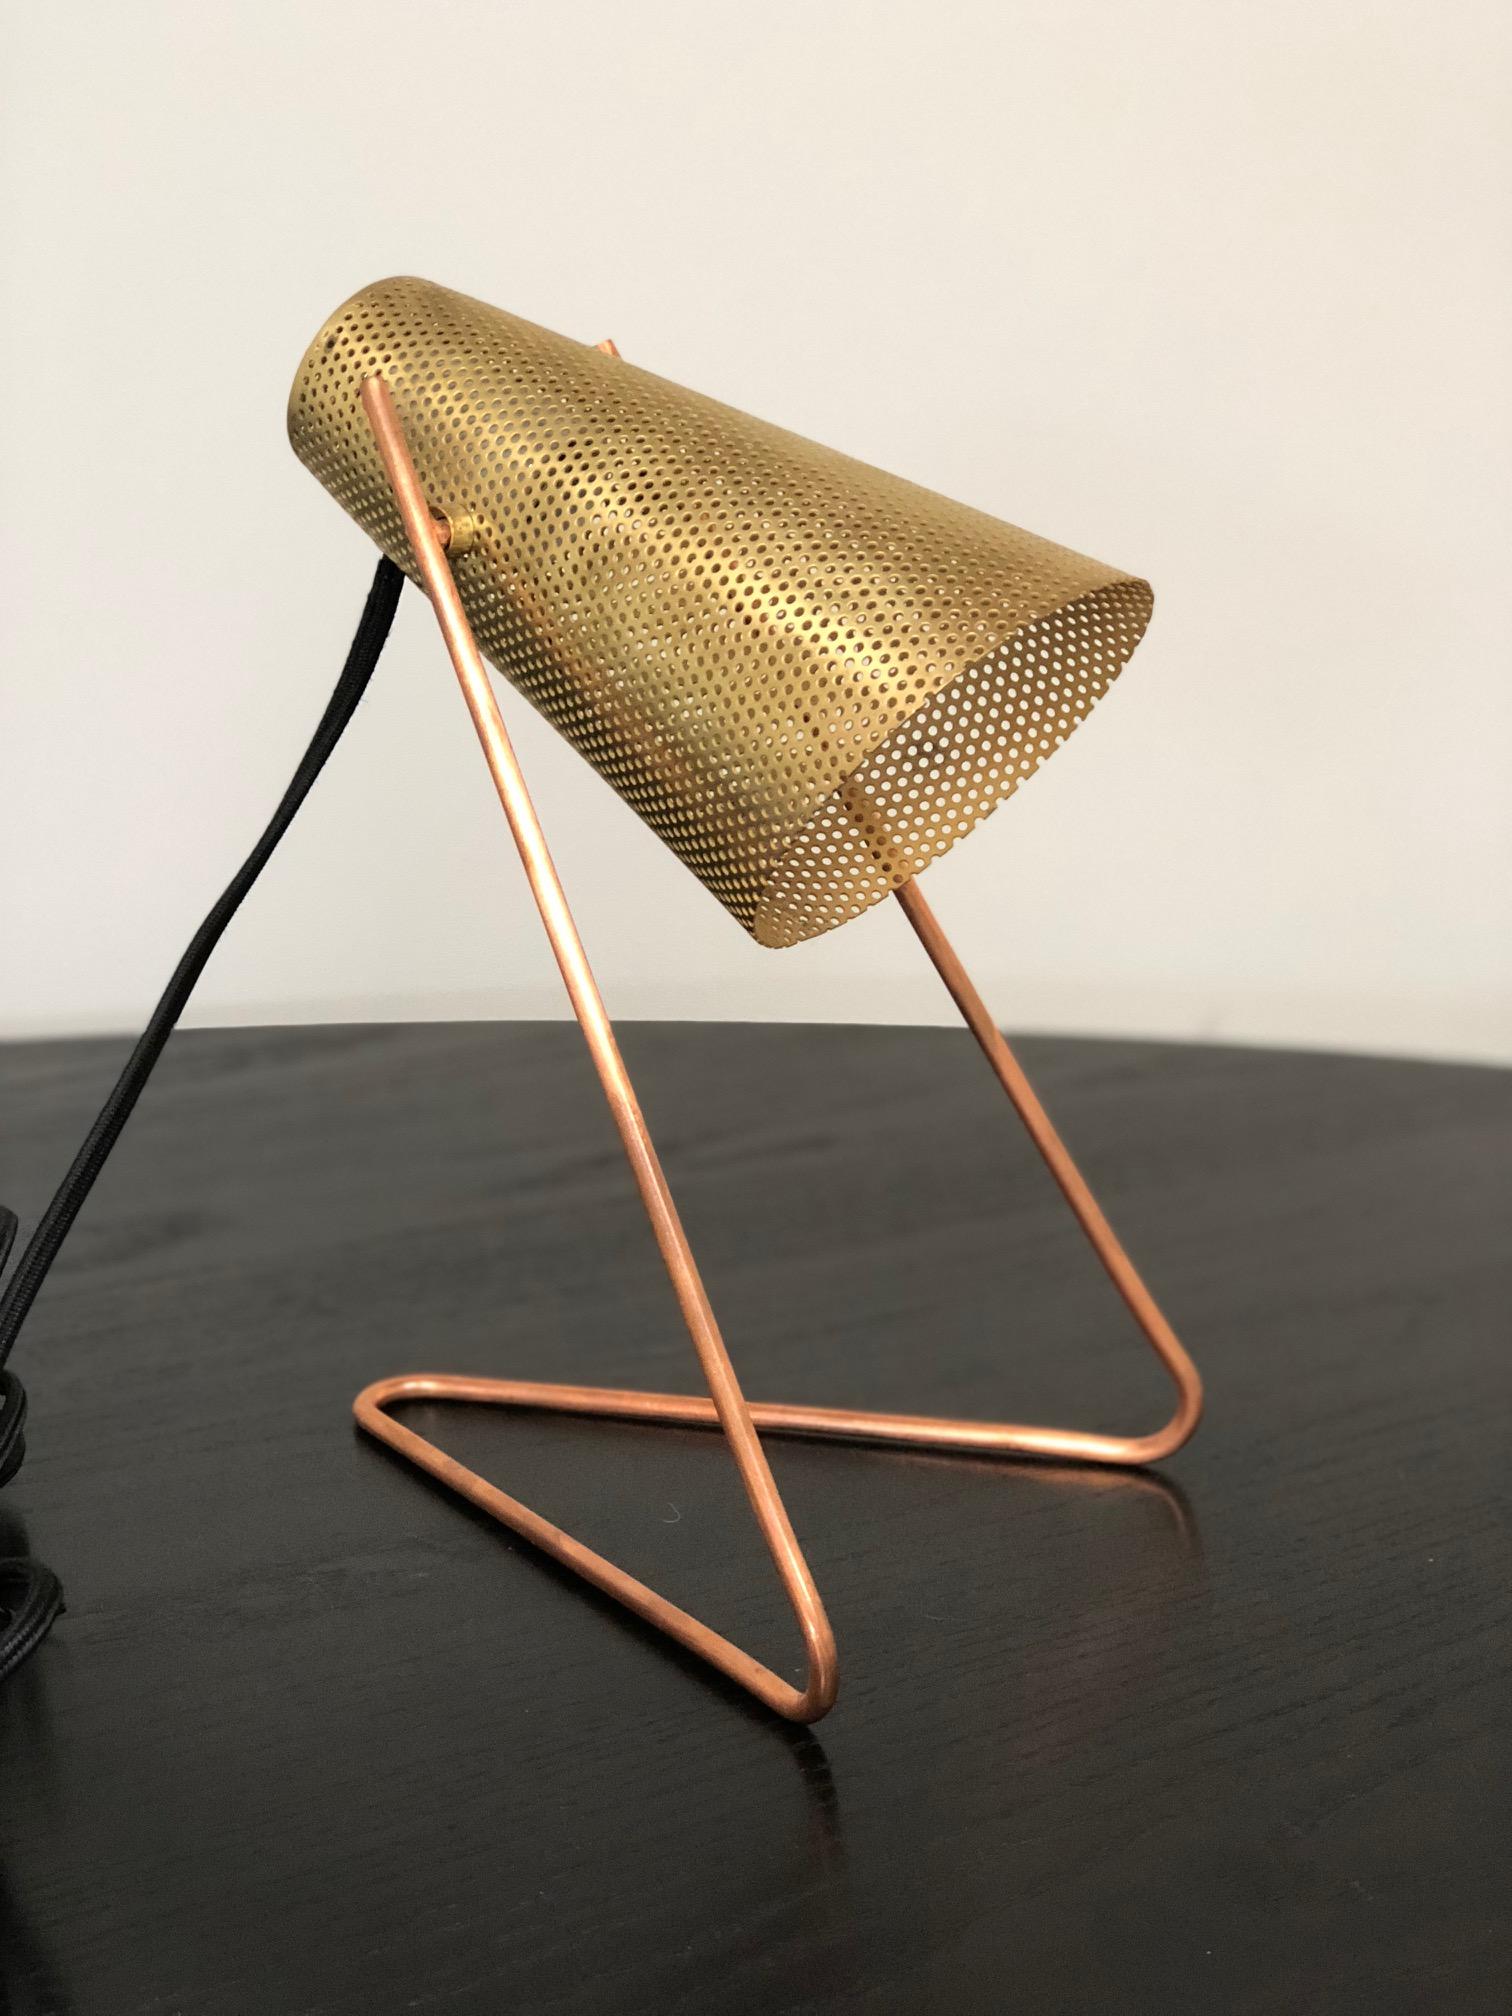 perforate brass table lamp